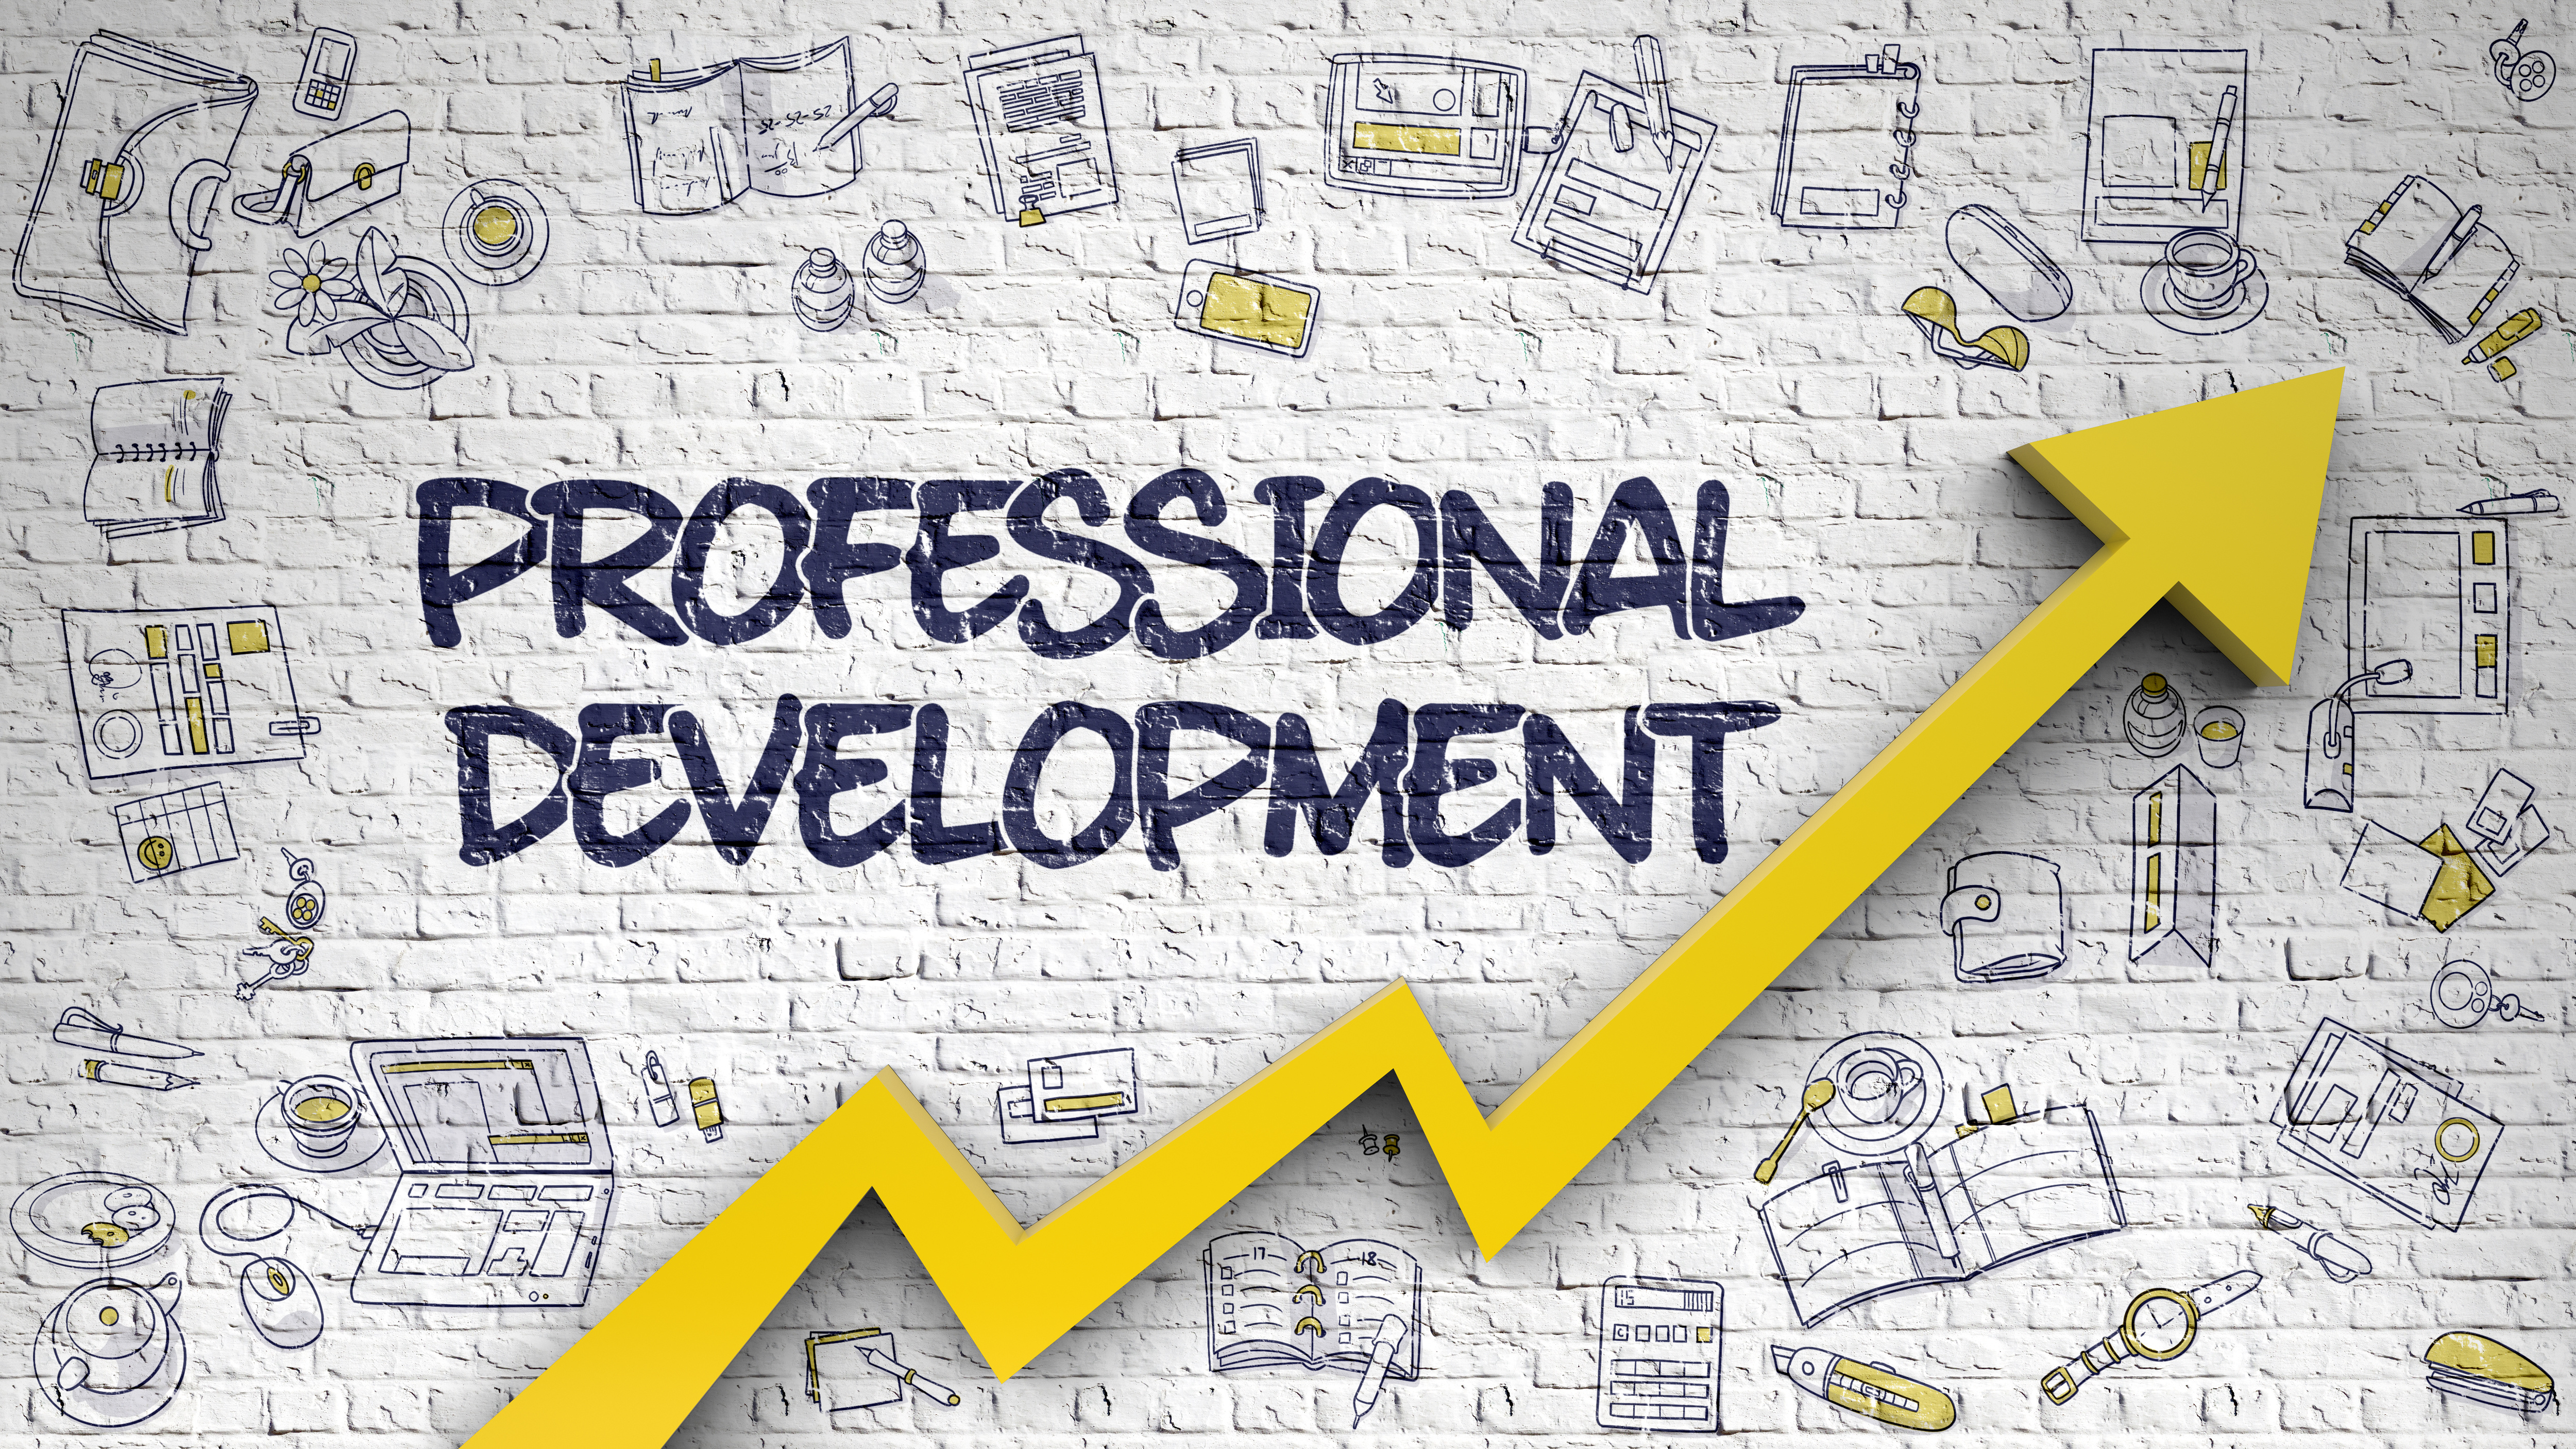 Stressing the importance of professional development within your organization